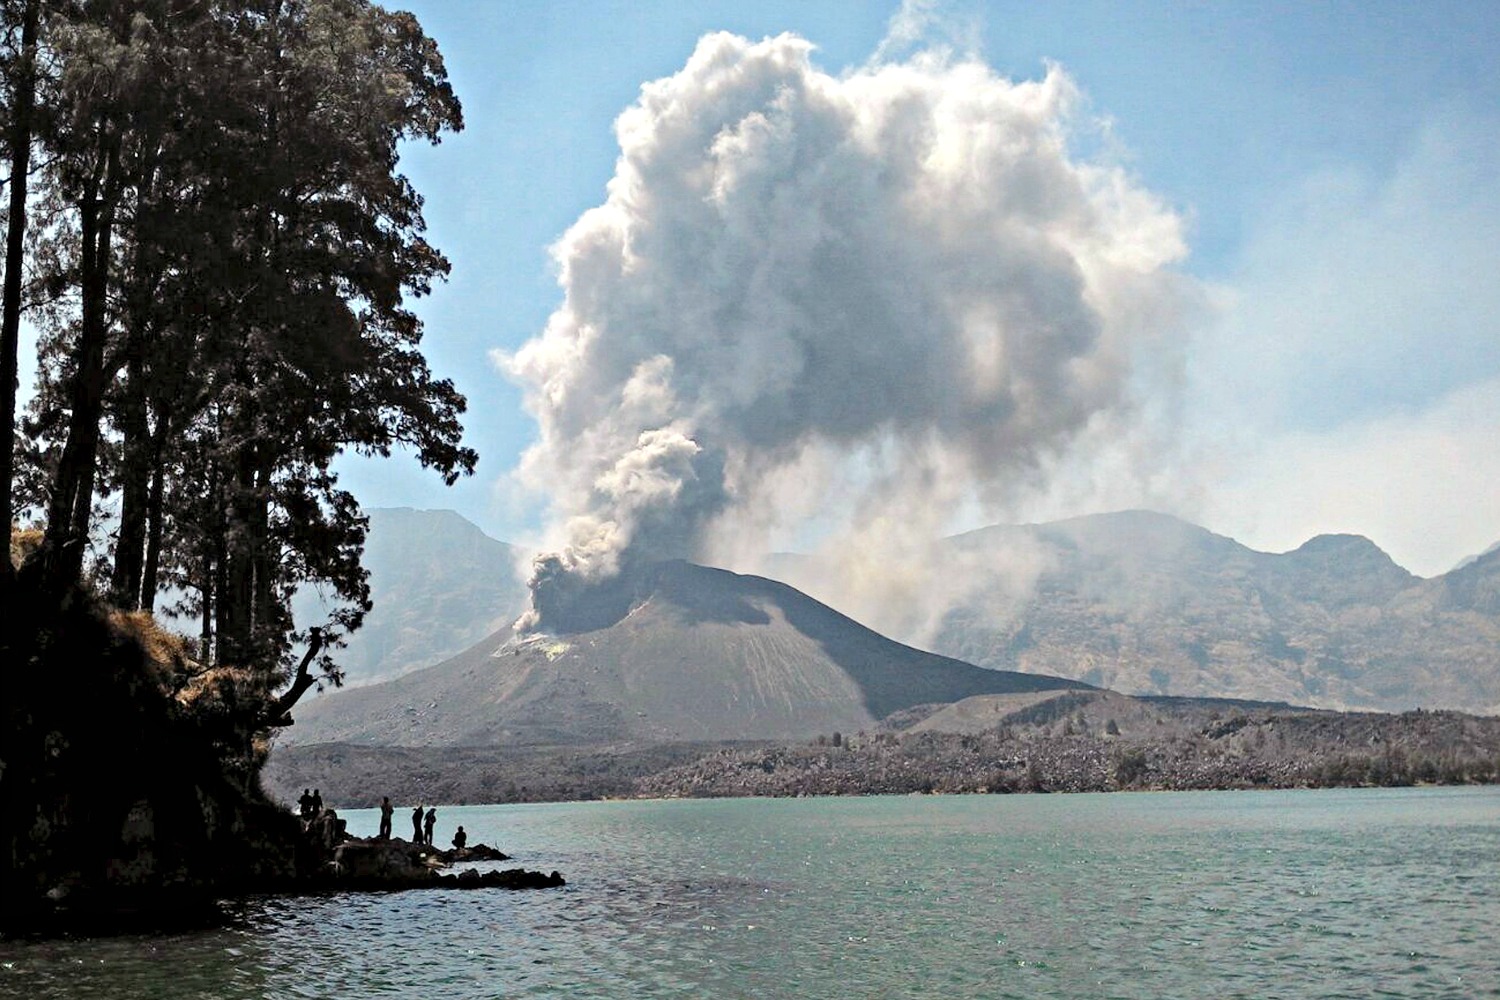 Bali airport closed due to volcanic activity